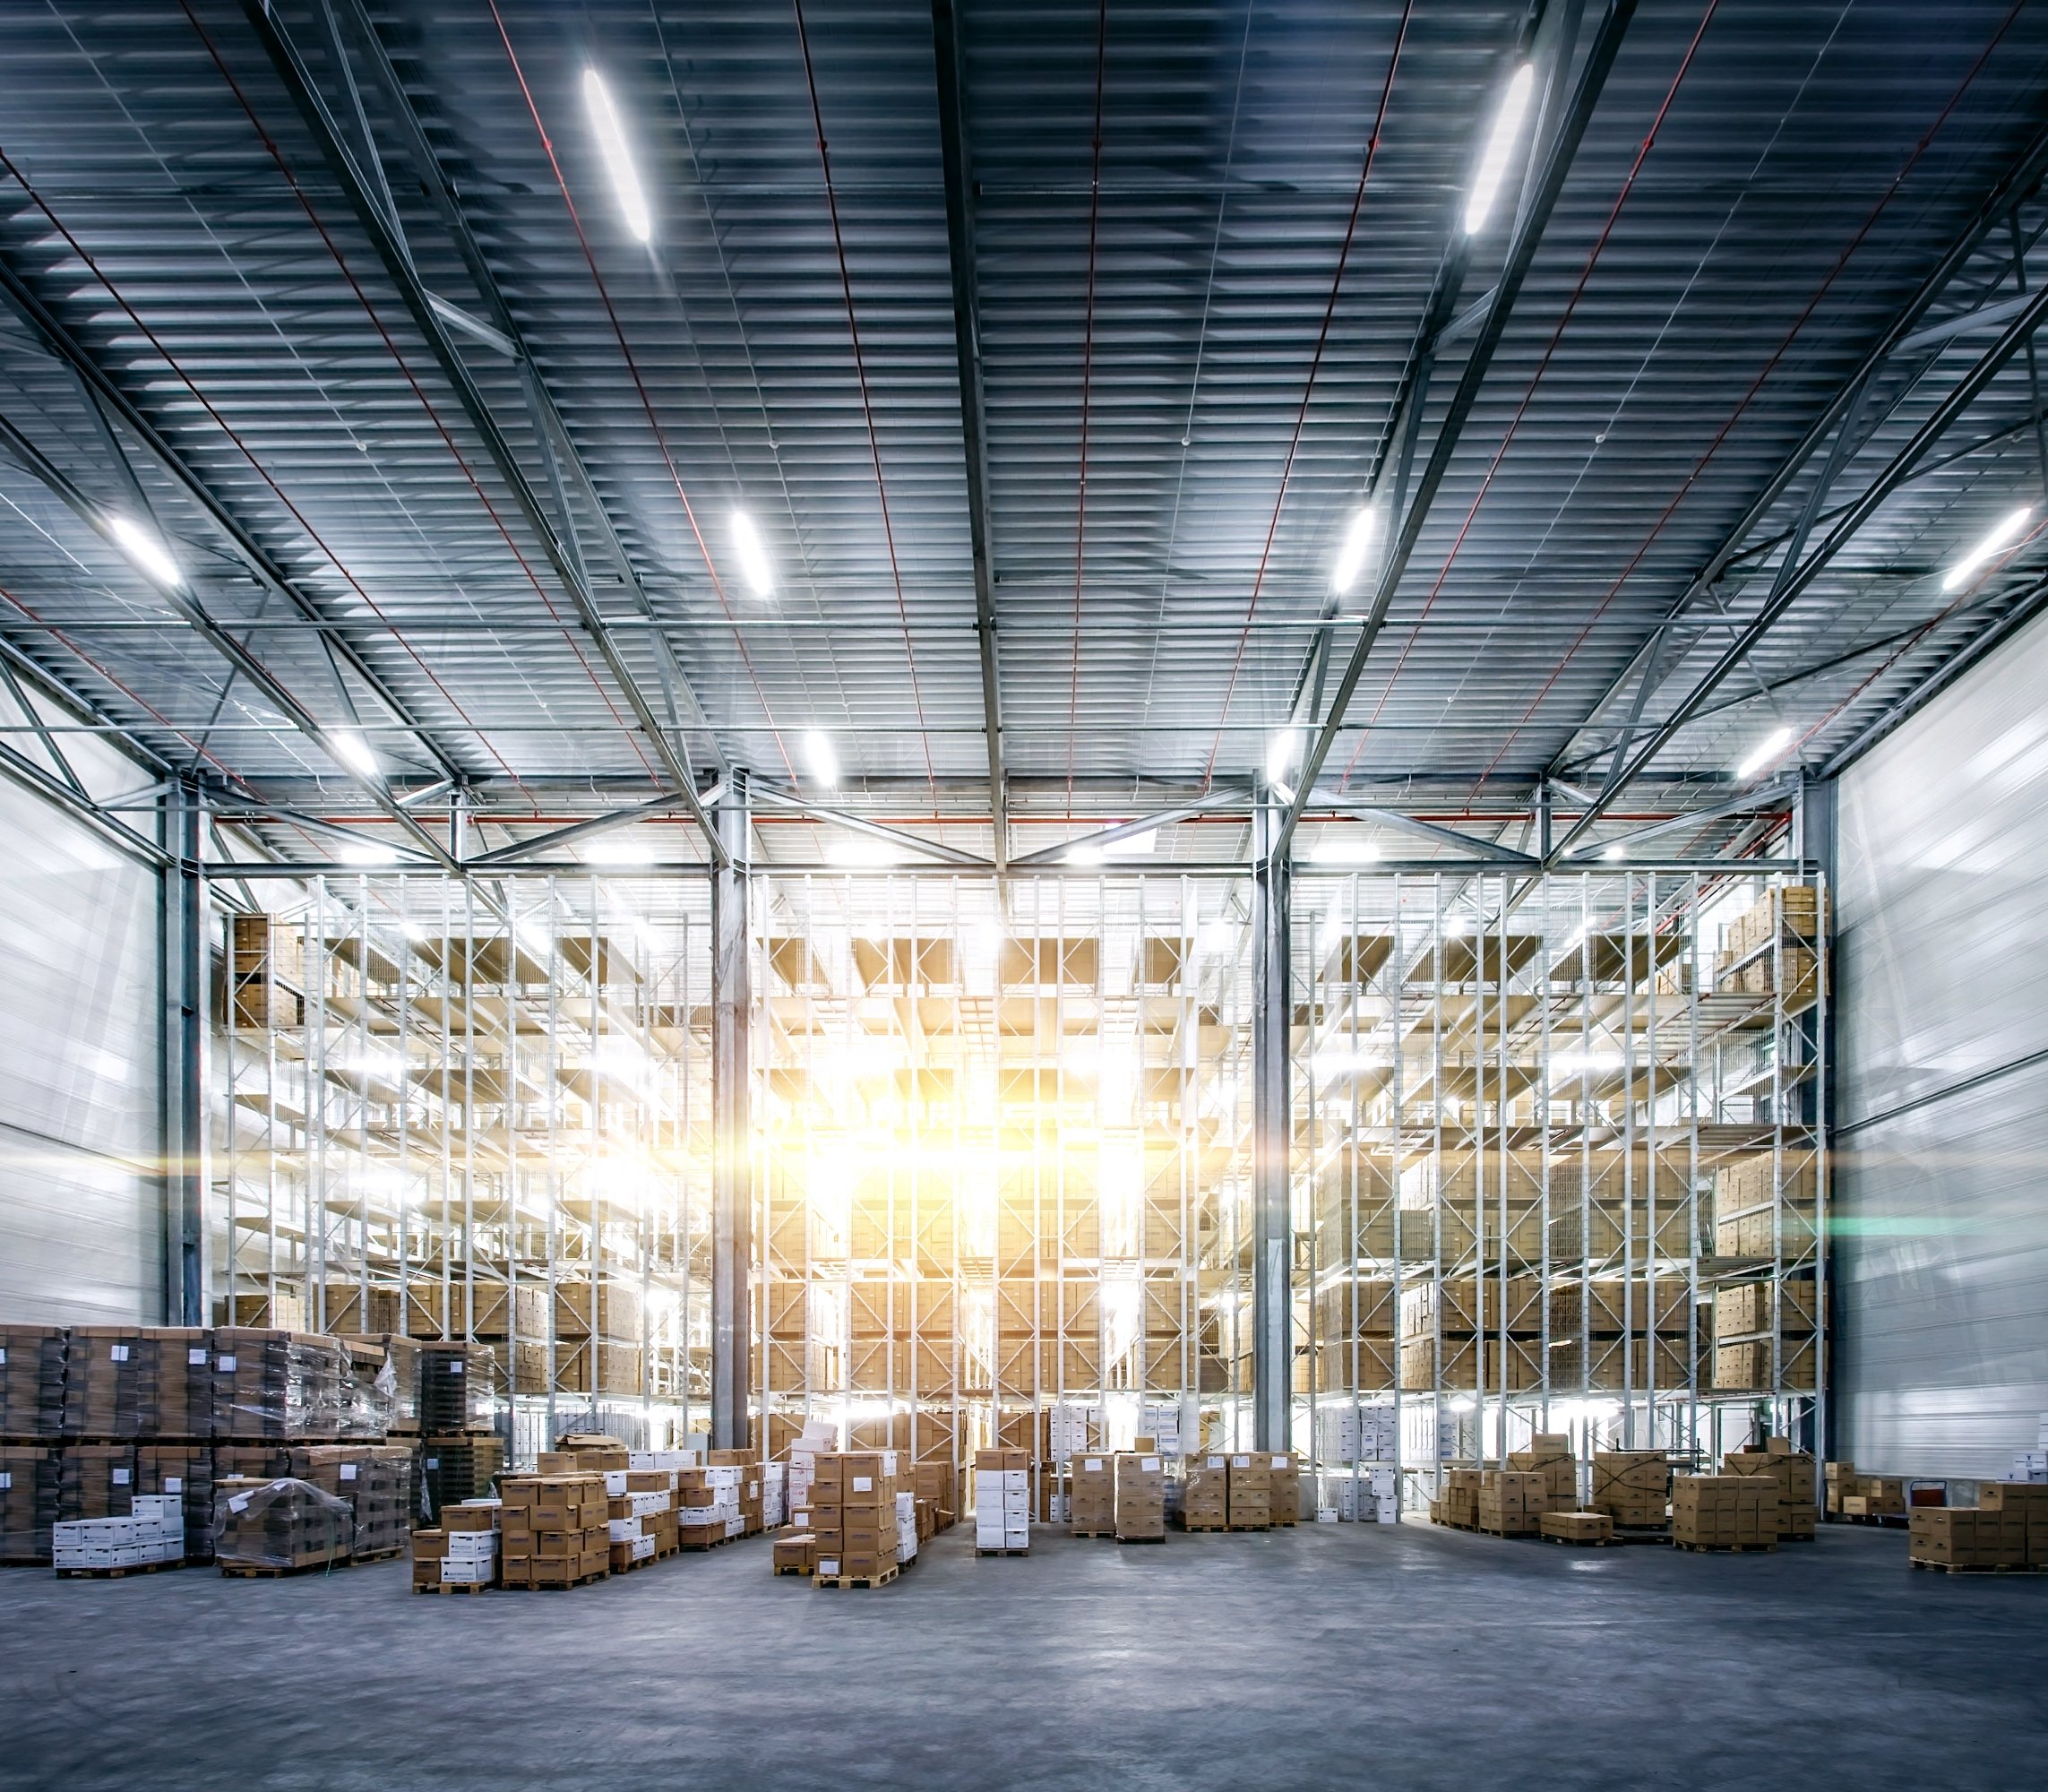 Warehousing Solutions - Efficient Storage and Distribution | RHENUS Group India